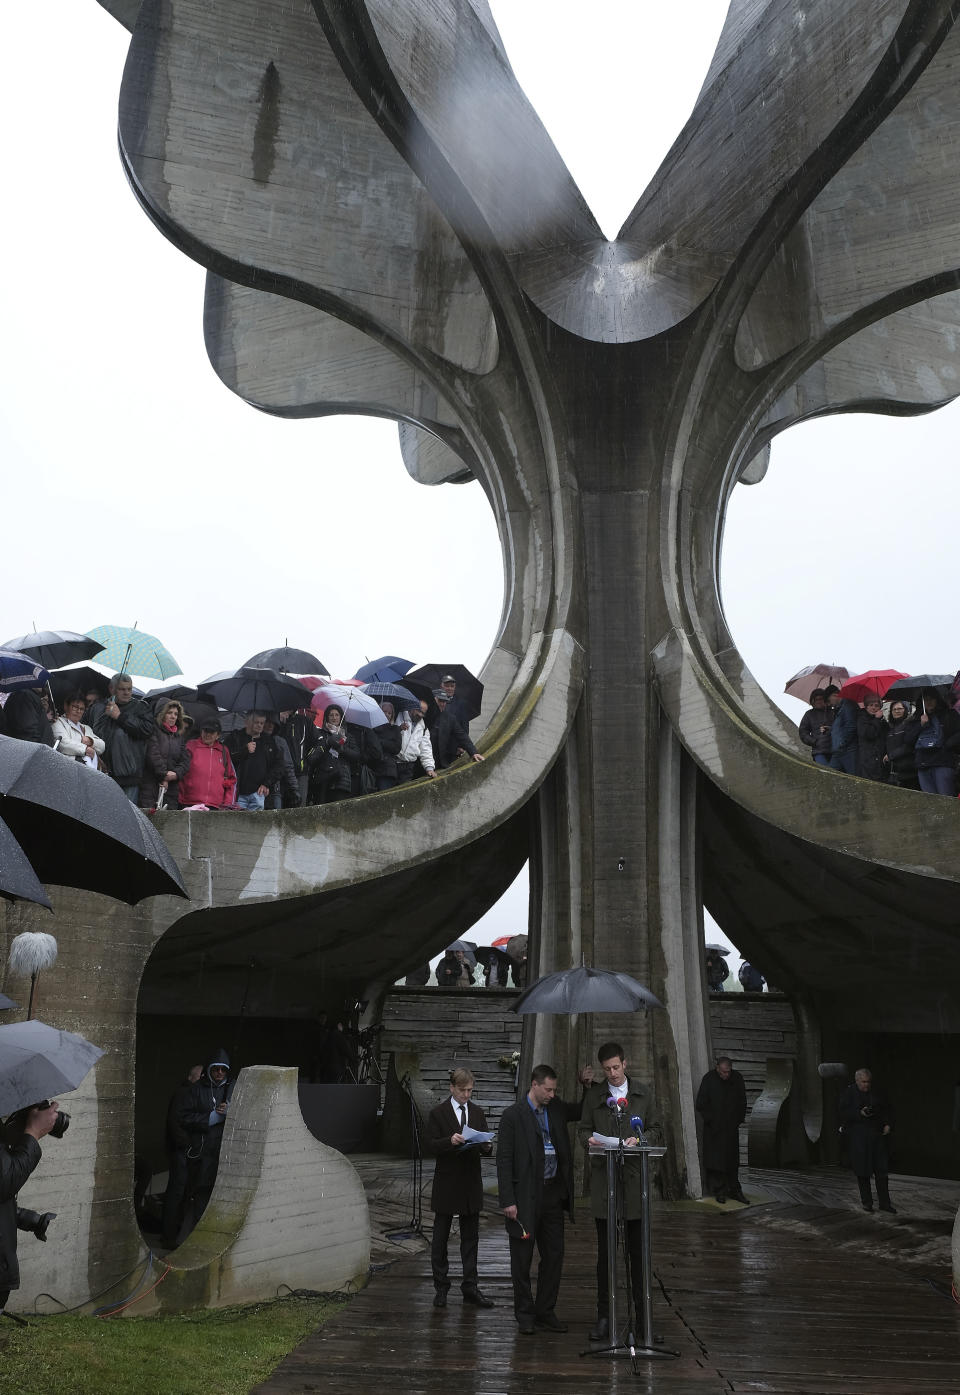 People gather at the monument for victims to pay their respects for tens of thousands of people killed in death camps run by Croatia's pro-Nazi puppet state in WWII, in Jasenovac, Croatia, Friday, April 12, 2019. Croatia's Jewish, Serb, anti-fascist and Roma groups have commemorated the victims of a World War II death camp, snubbing the official ceremonies for the fourth year in a row over what they say is government inaction to curb neo-Nazi sentiments in the European Union country. (AP Photo/Nikola Solic)